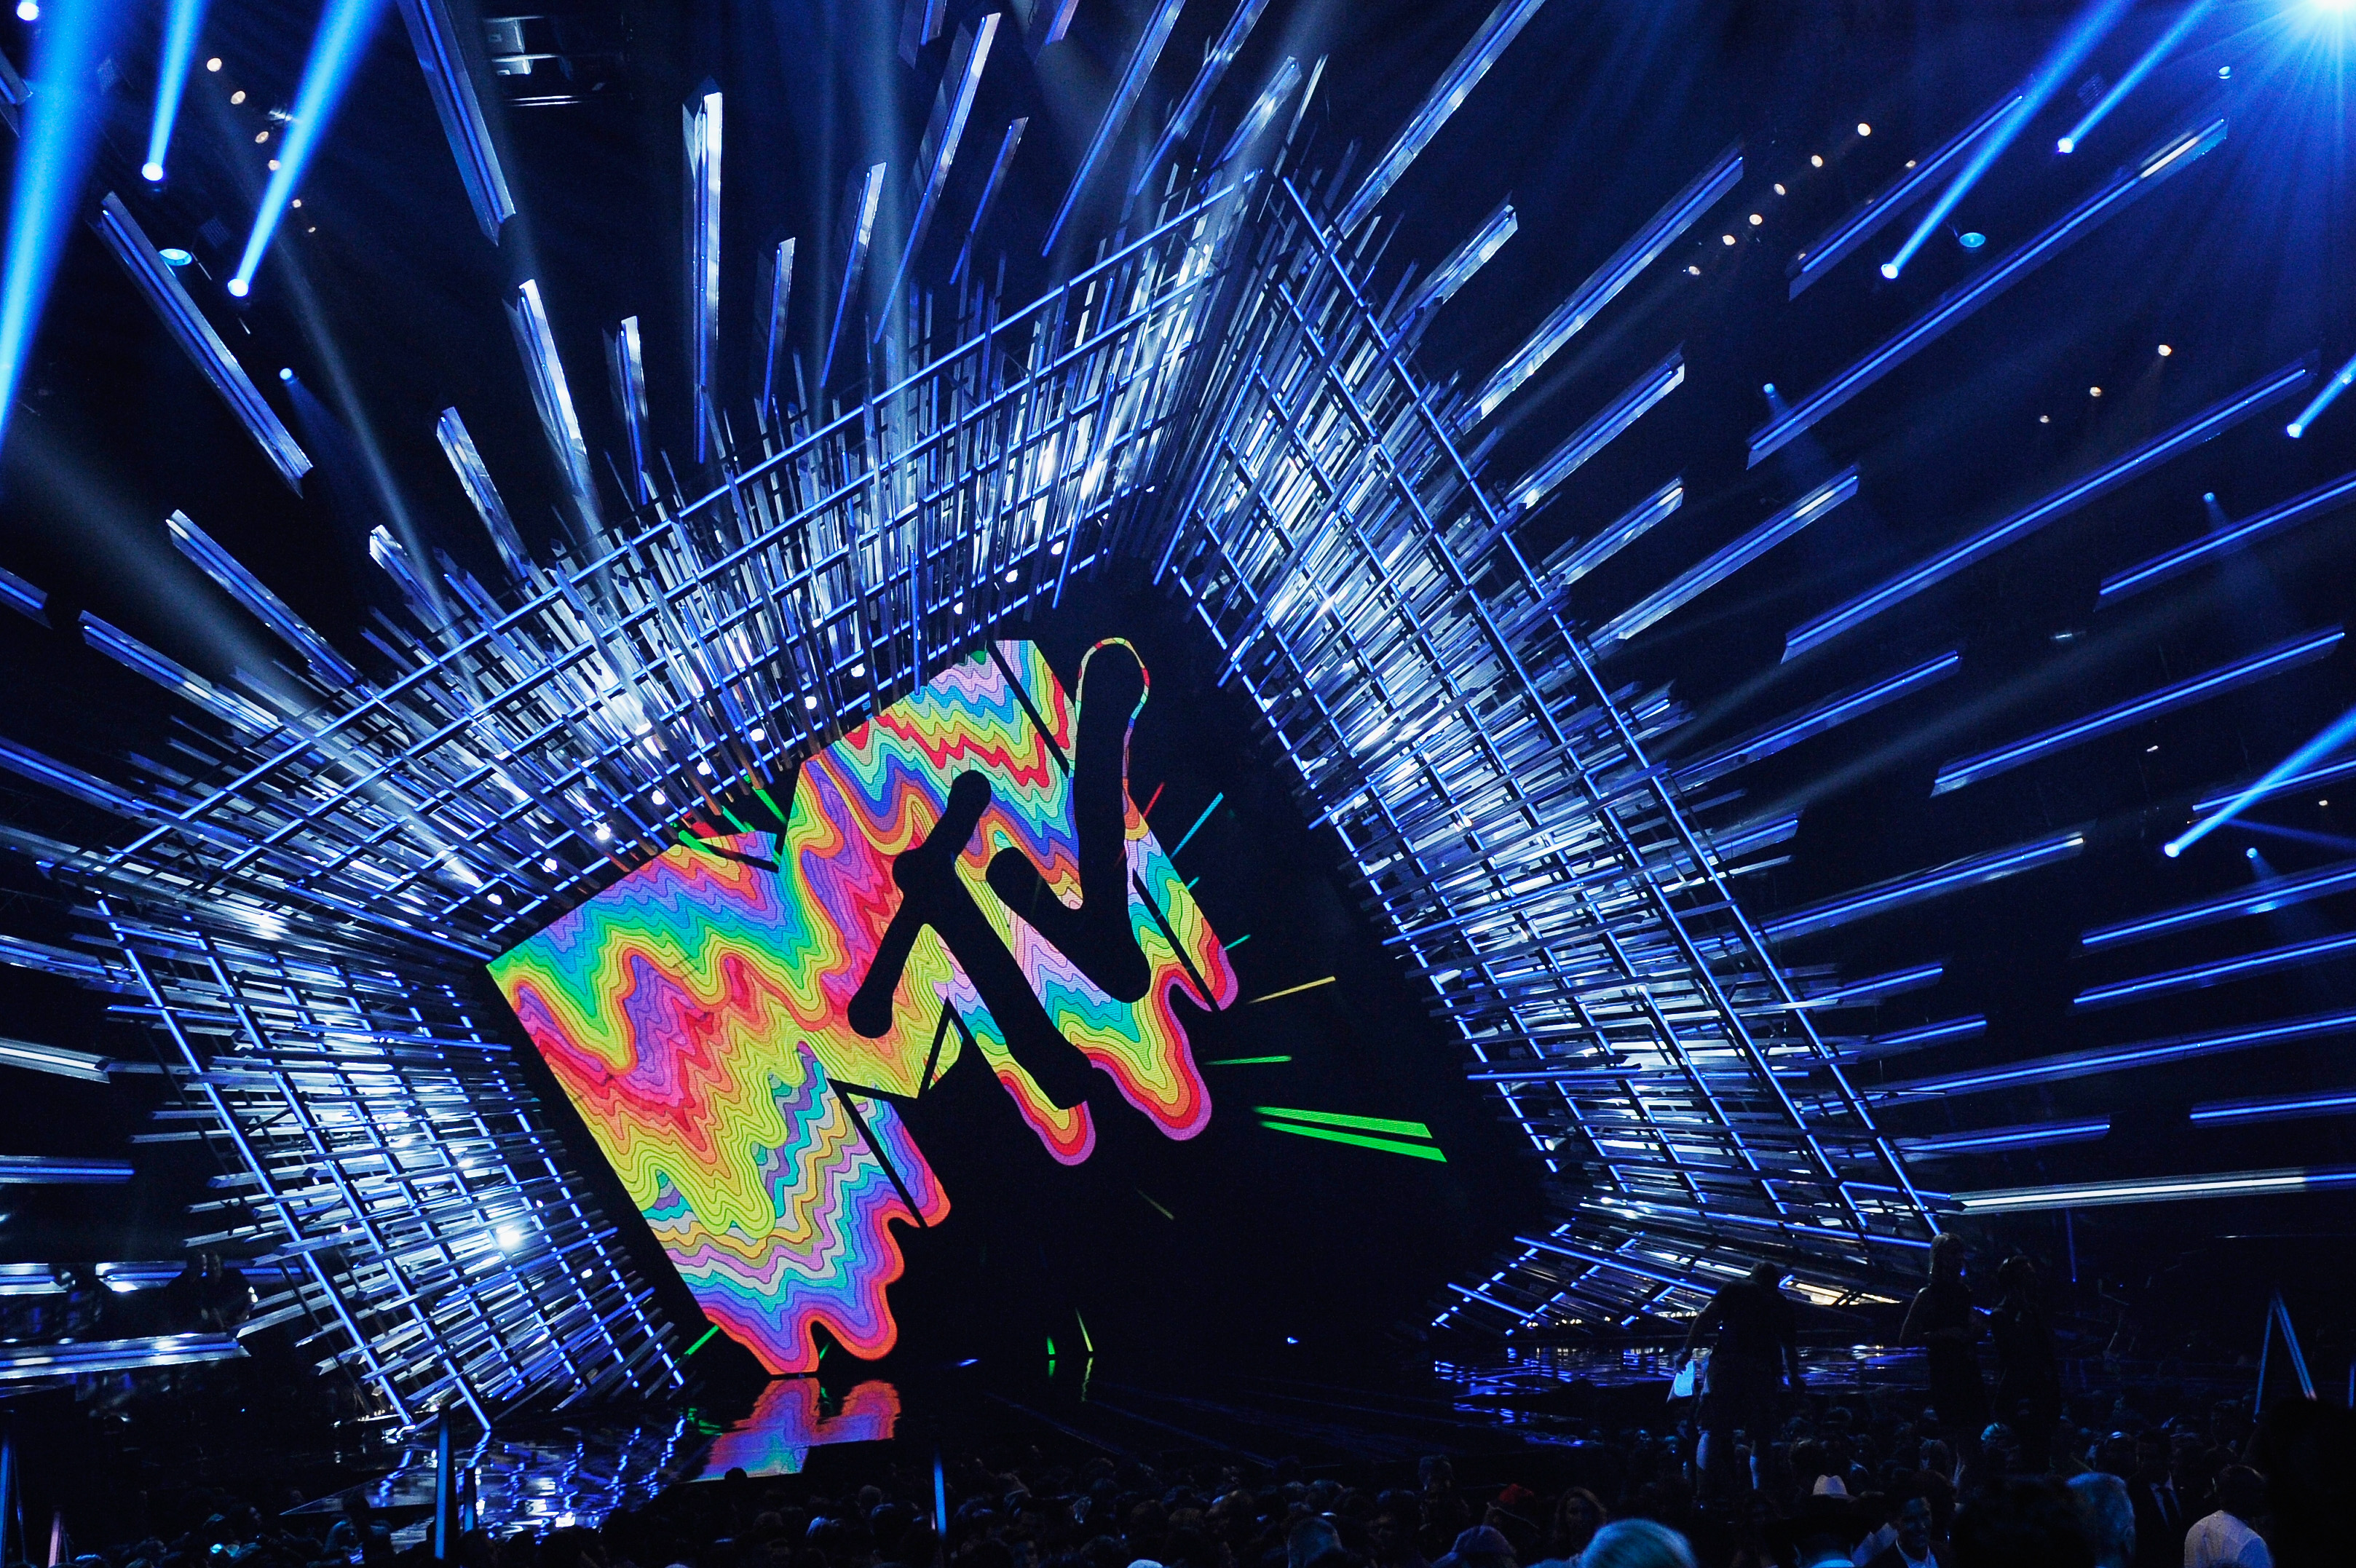 MTV Logo is seen onstage during the 2015 MTV Video Music Awards